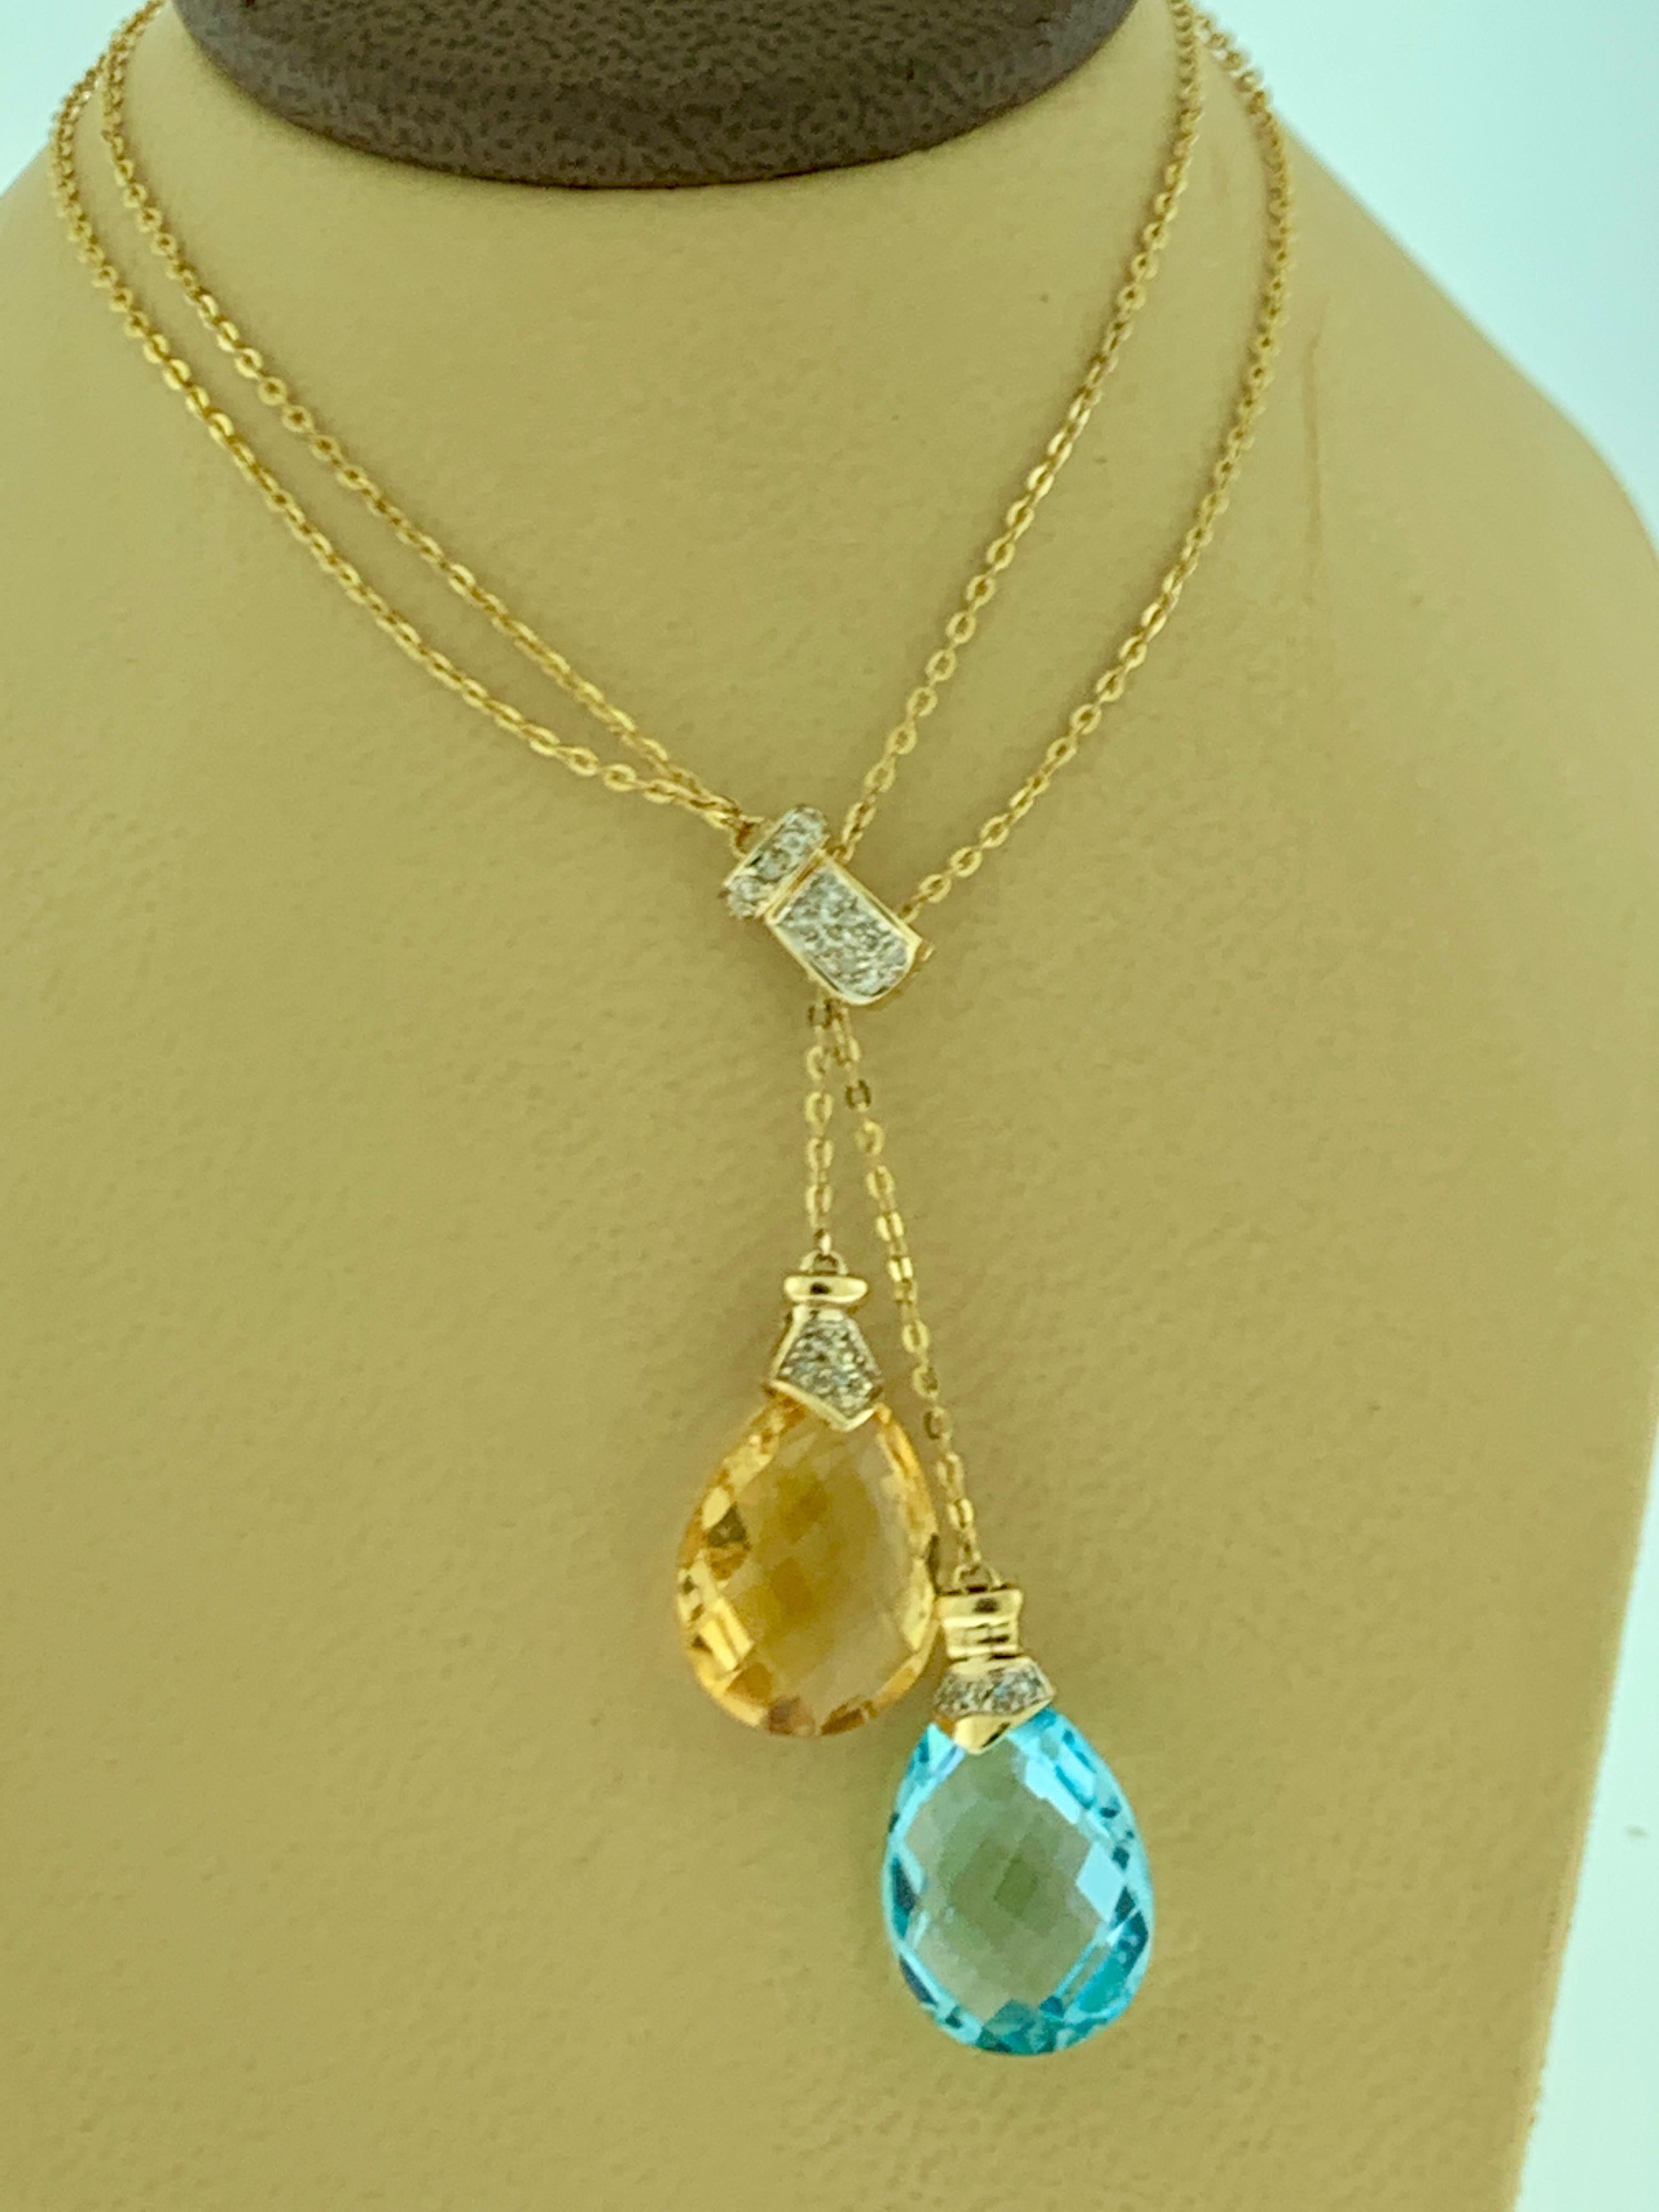 Women's Checkerboard Citrine and Blue Topaz Pendent/Necklace 14 Karat Gold Double Chain